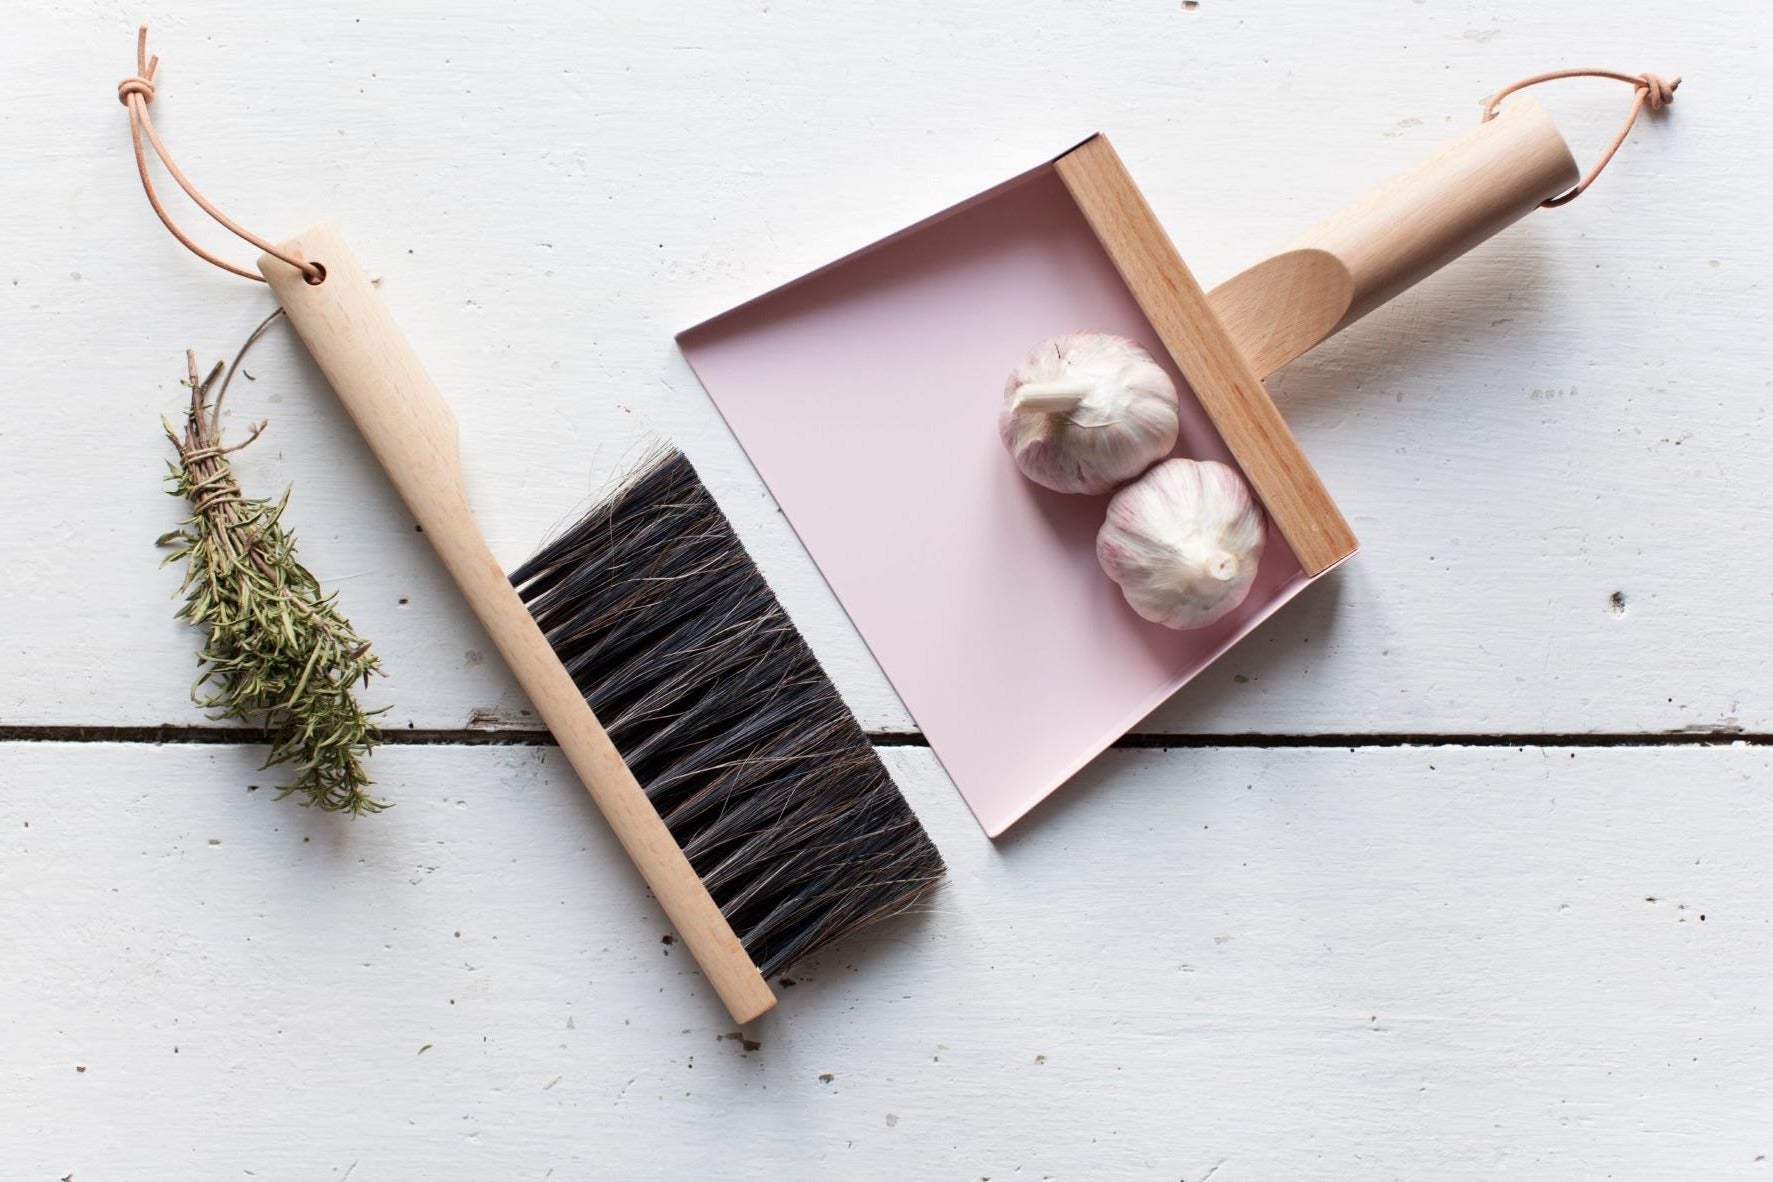 Andrée Jardin Mr. and Mrs. Clynk Dustpan & Brush "Coffret" Gift Set with Wall Hooks Utilities Andrée Jardin Brand_Andrée Jardin Home_Broom Sets Home_Household Cleaning New Arrivals AndreeJardinMr.andMrs.ClynkLightPinkDustpan_BrushCoffretGiftSet_5